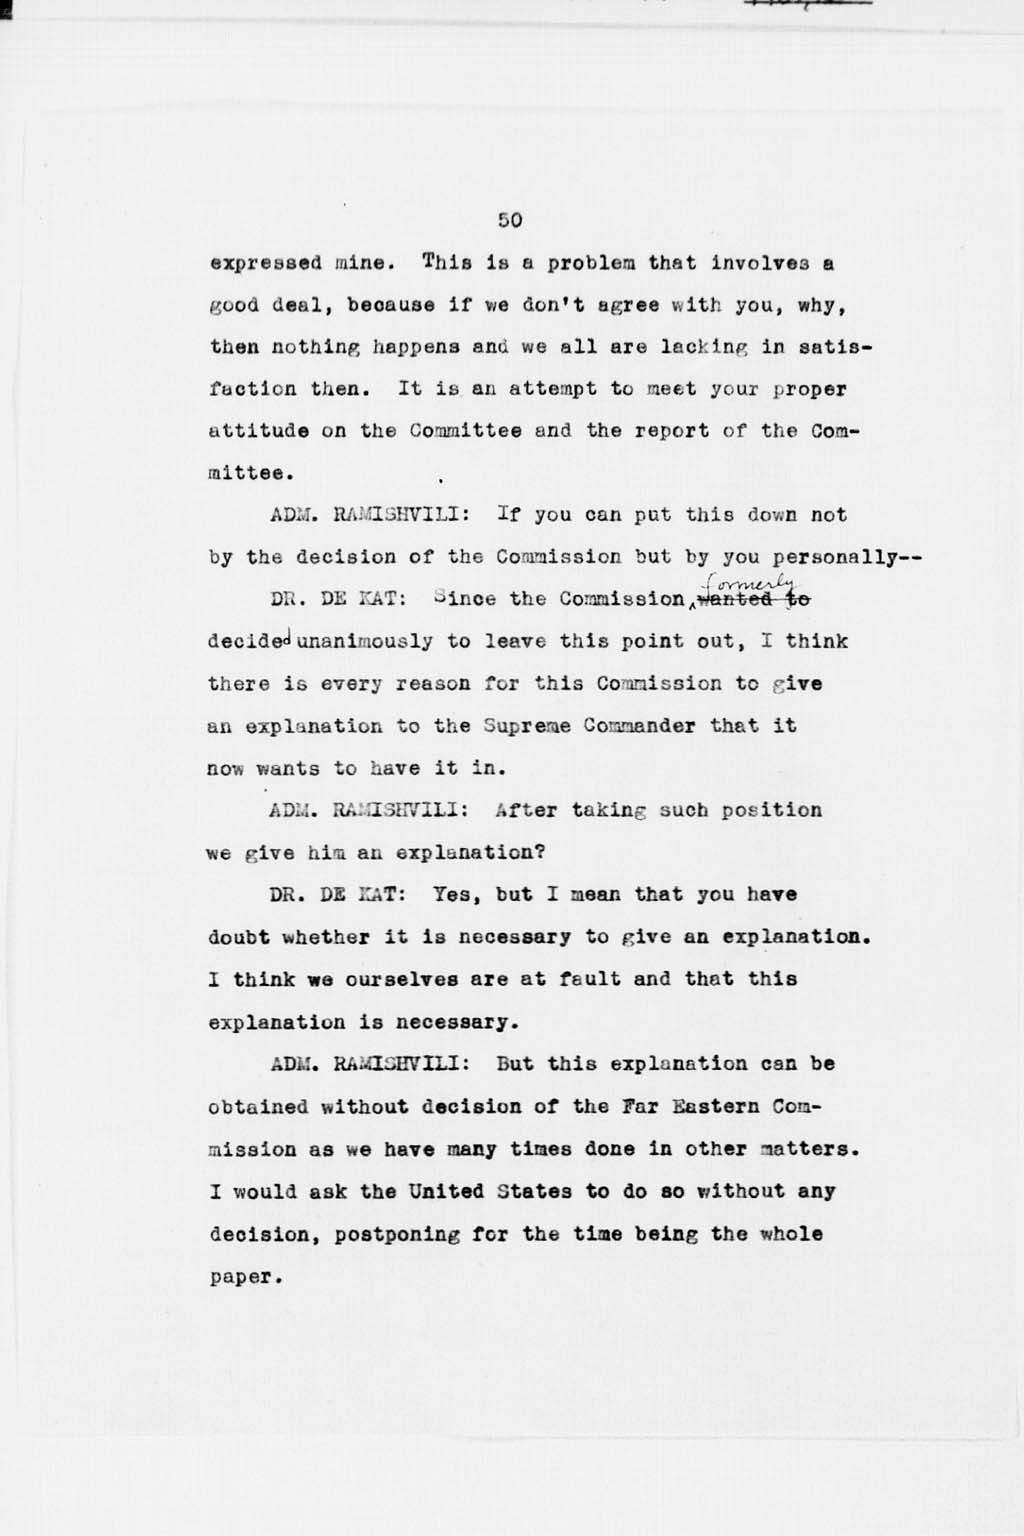 『Transcript of Twenty-Seventh Meeting of the Far Eastern Commission, Held in Main Conference Room, 2516 Massachusetts Avenue, N.W., Saturday, September 21, 1946』(拡大画像)